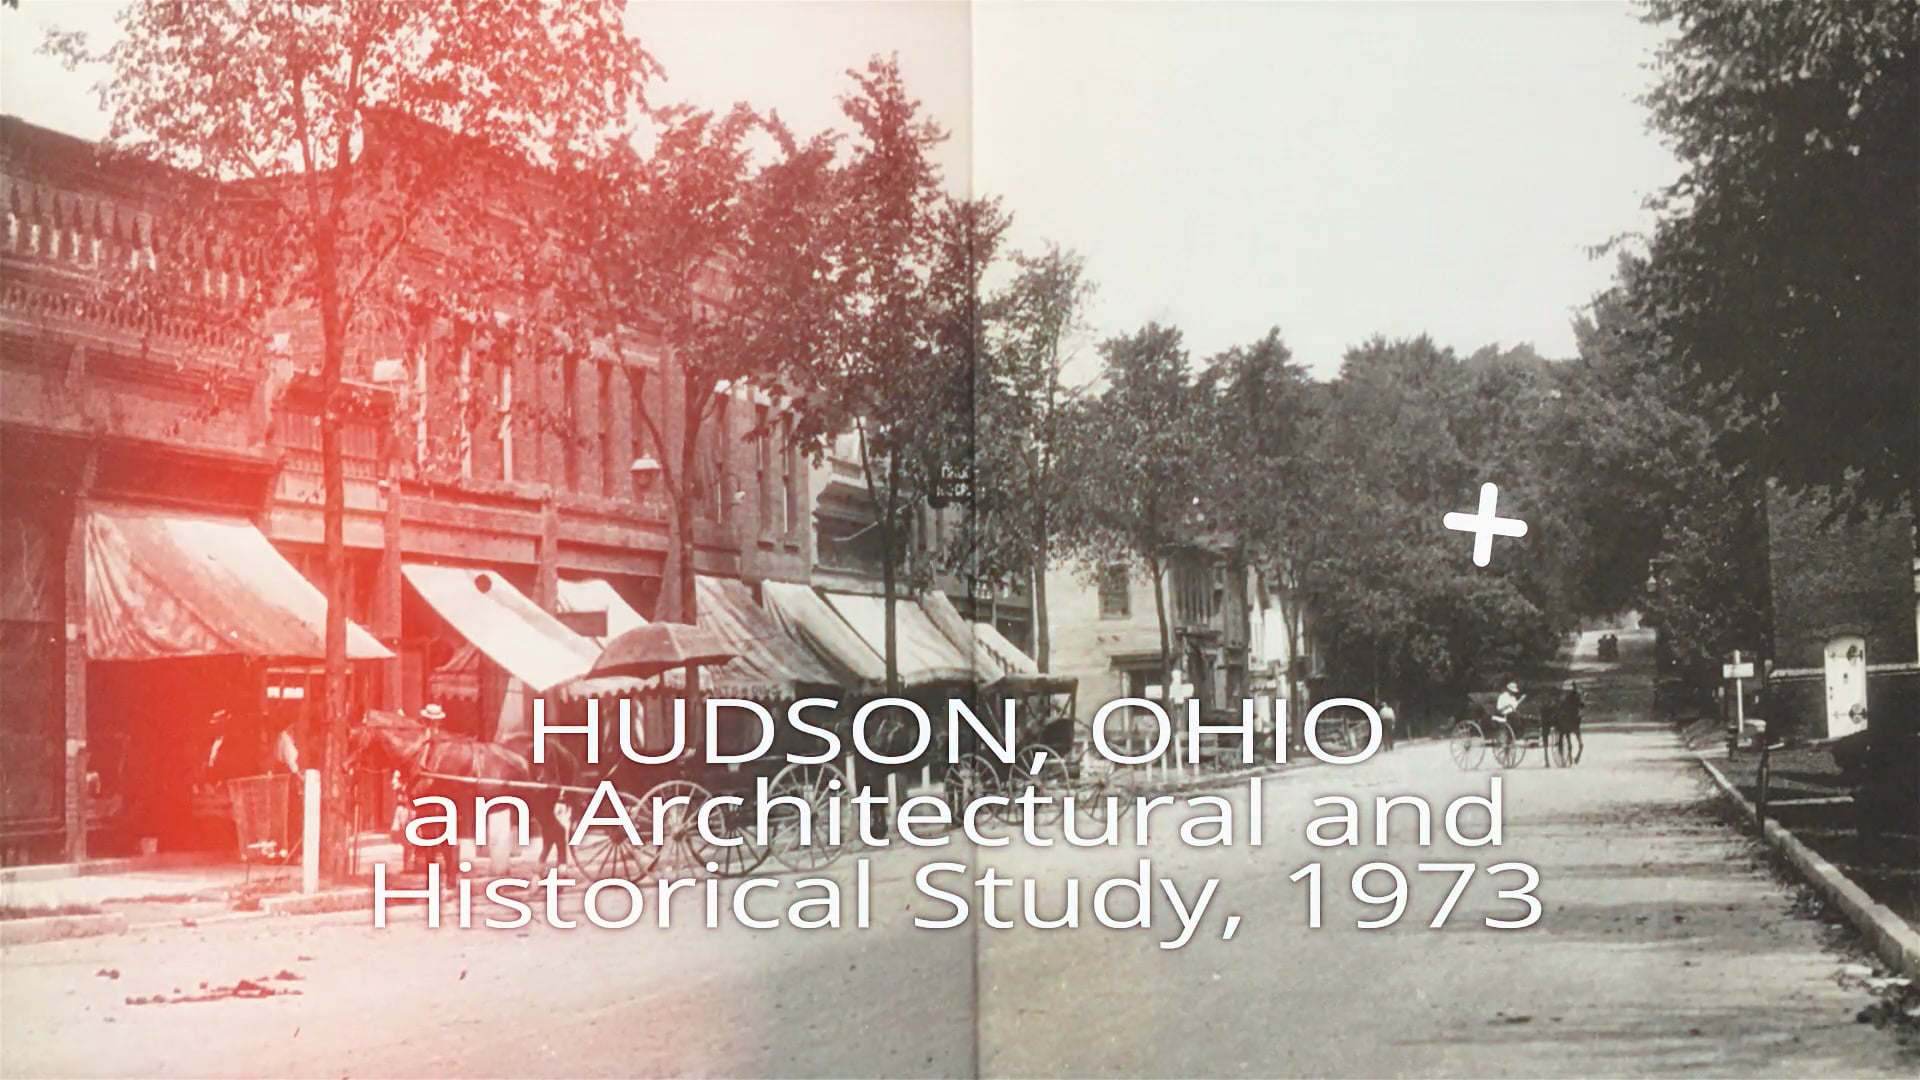 Hudson Heritage Association - 1973 Architectural and Historical Study